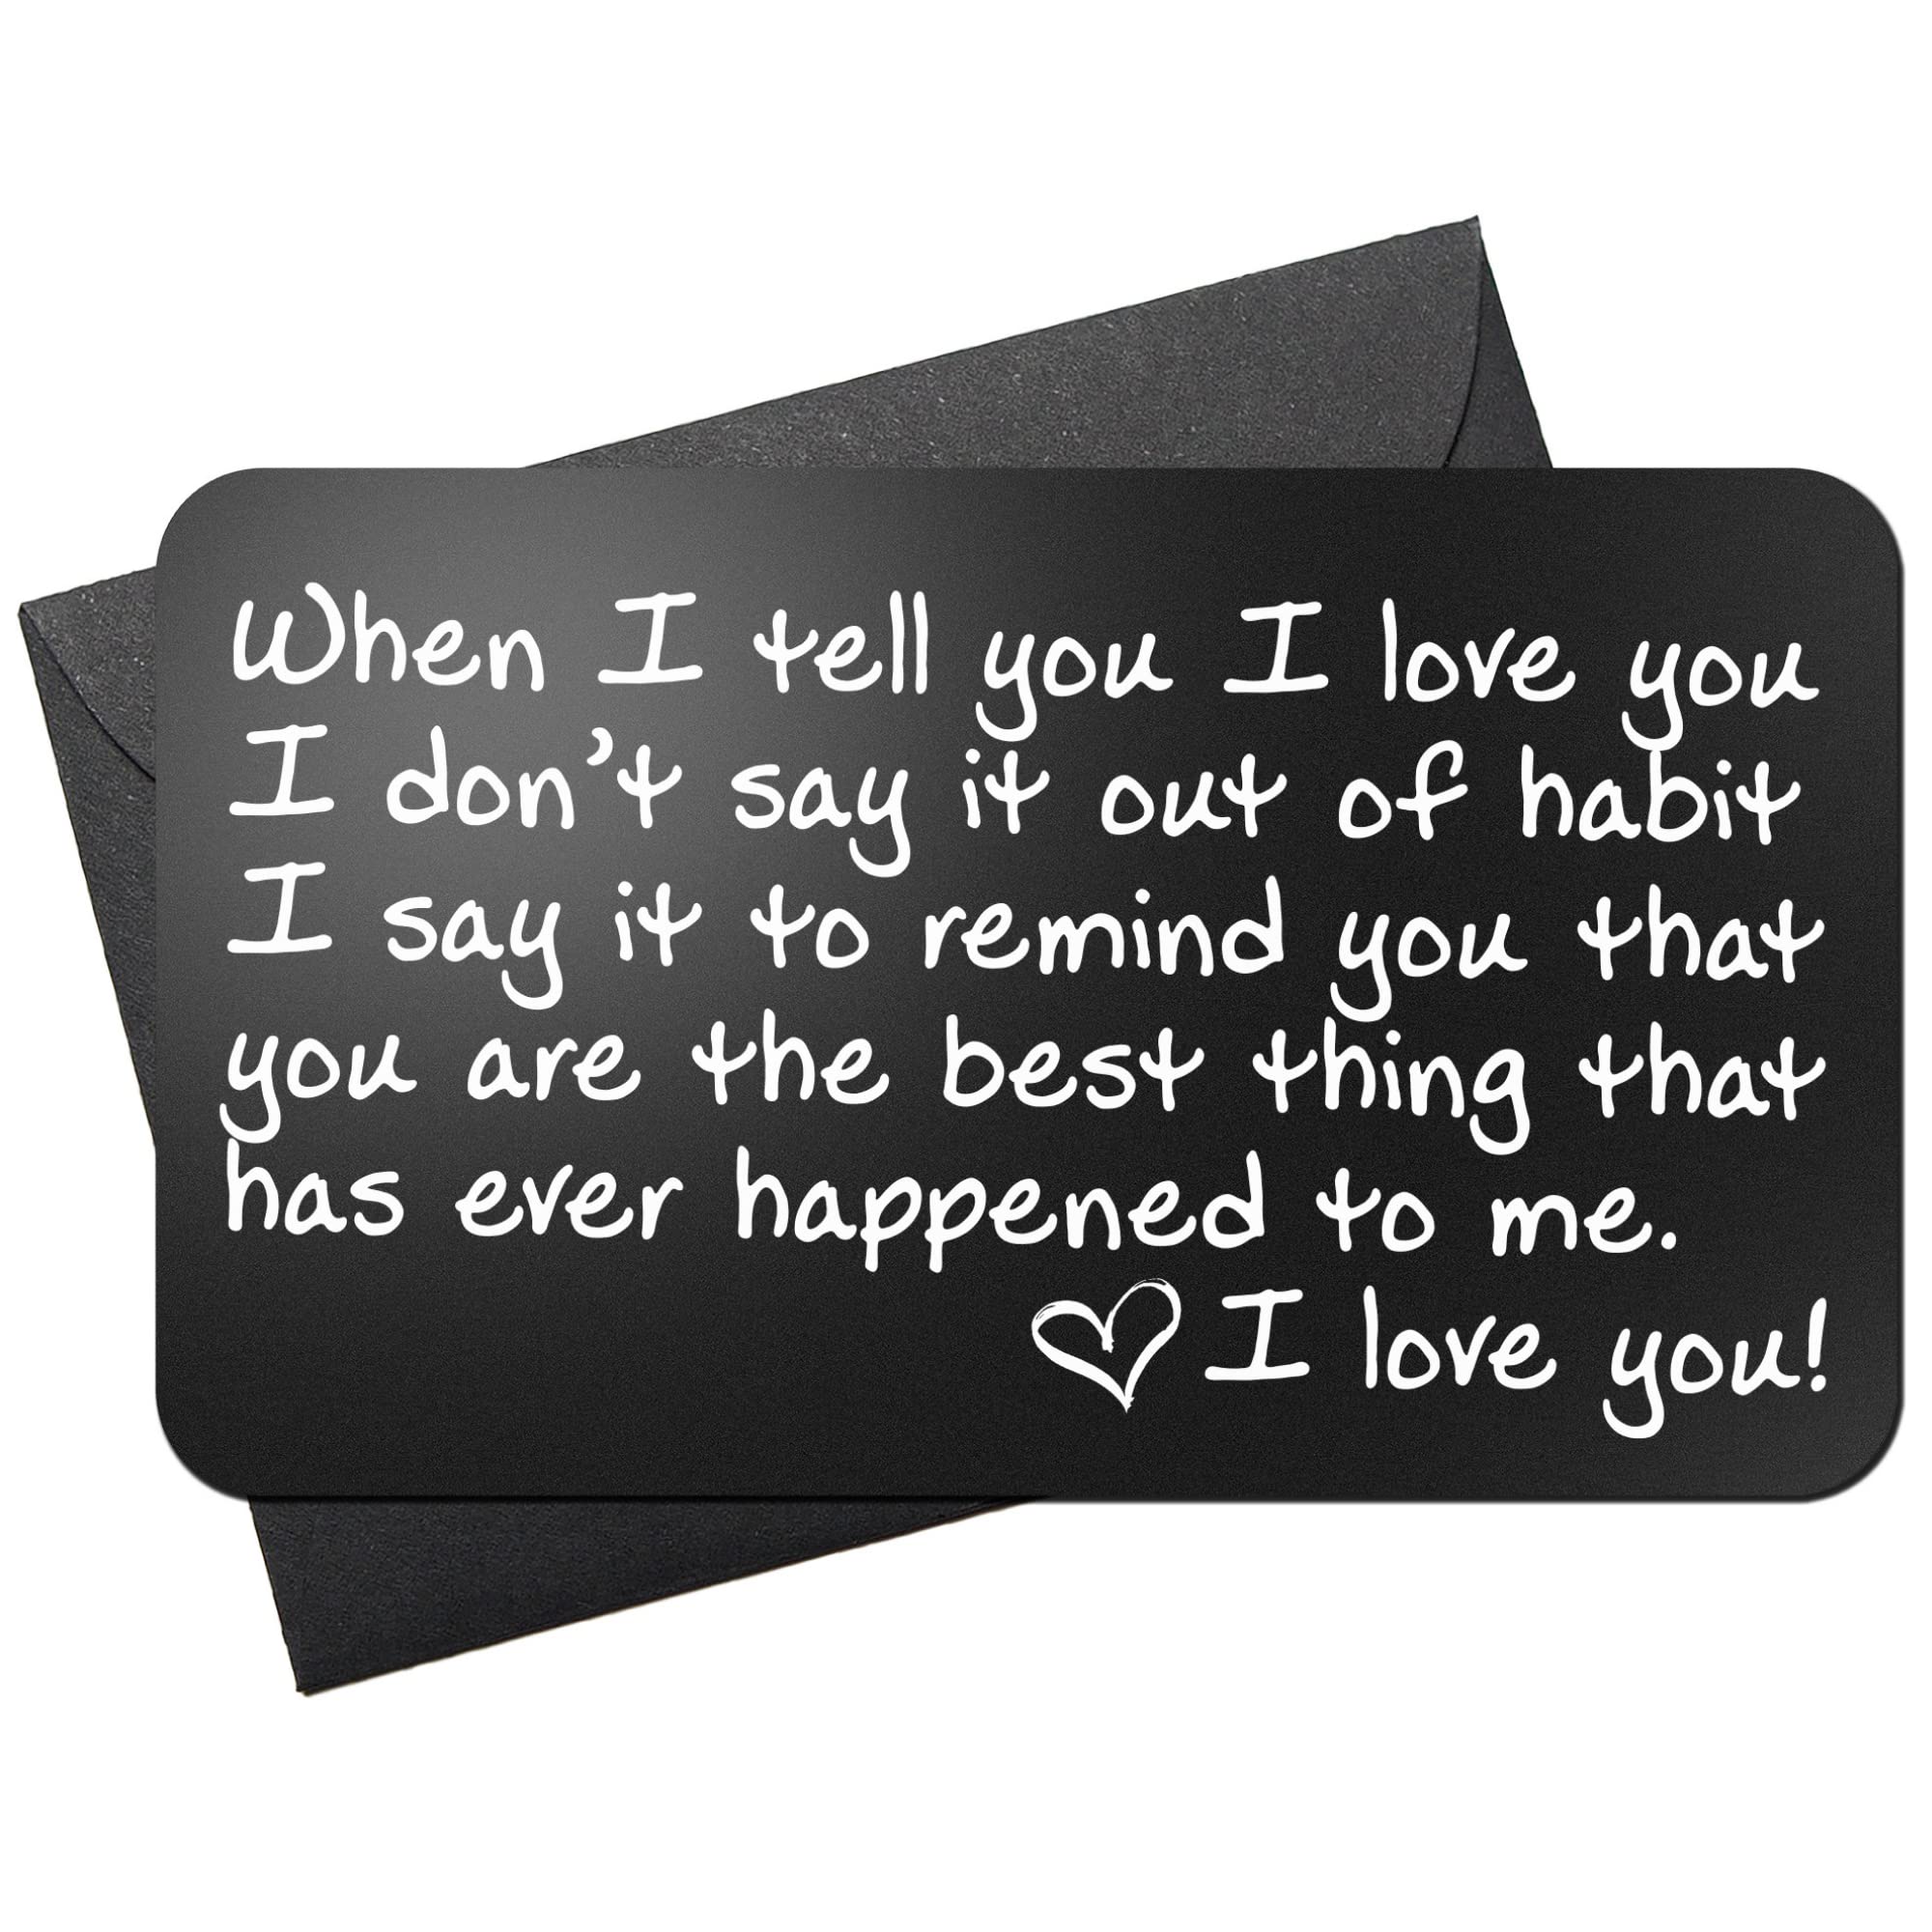 Book Cover Wallet Card Love Note | Engraved Aluminum Anniversary Gifts for Men & Women | Husband Gifts from Wife | Boyfriend Gift Idea | Romantic Gift for Him or Her | Birthday | A Unique Way to Say I Love You!